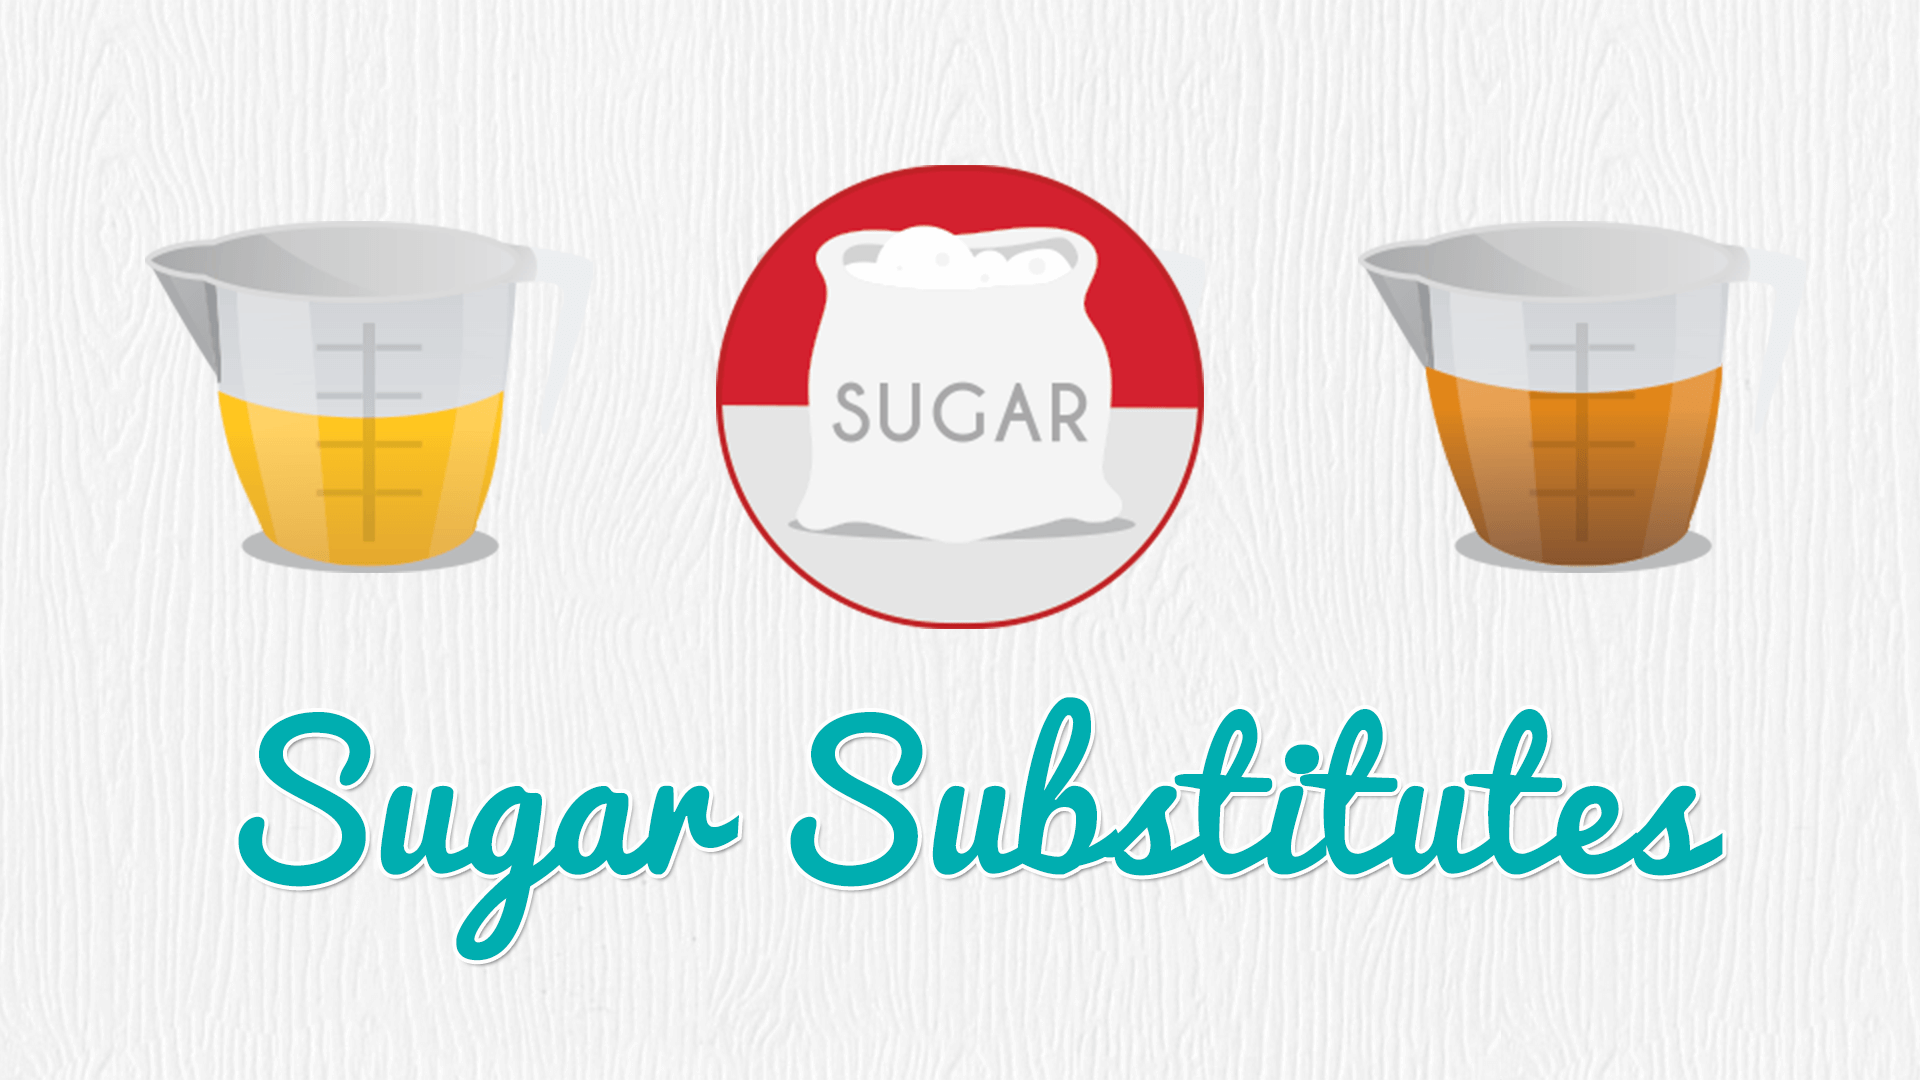 What is the healthiest alternative to sugar?